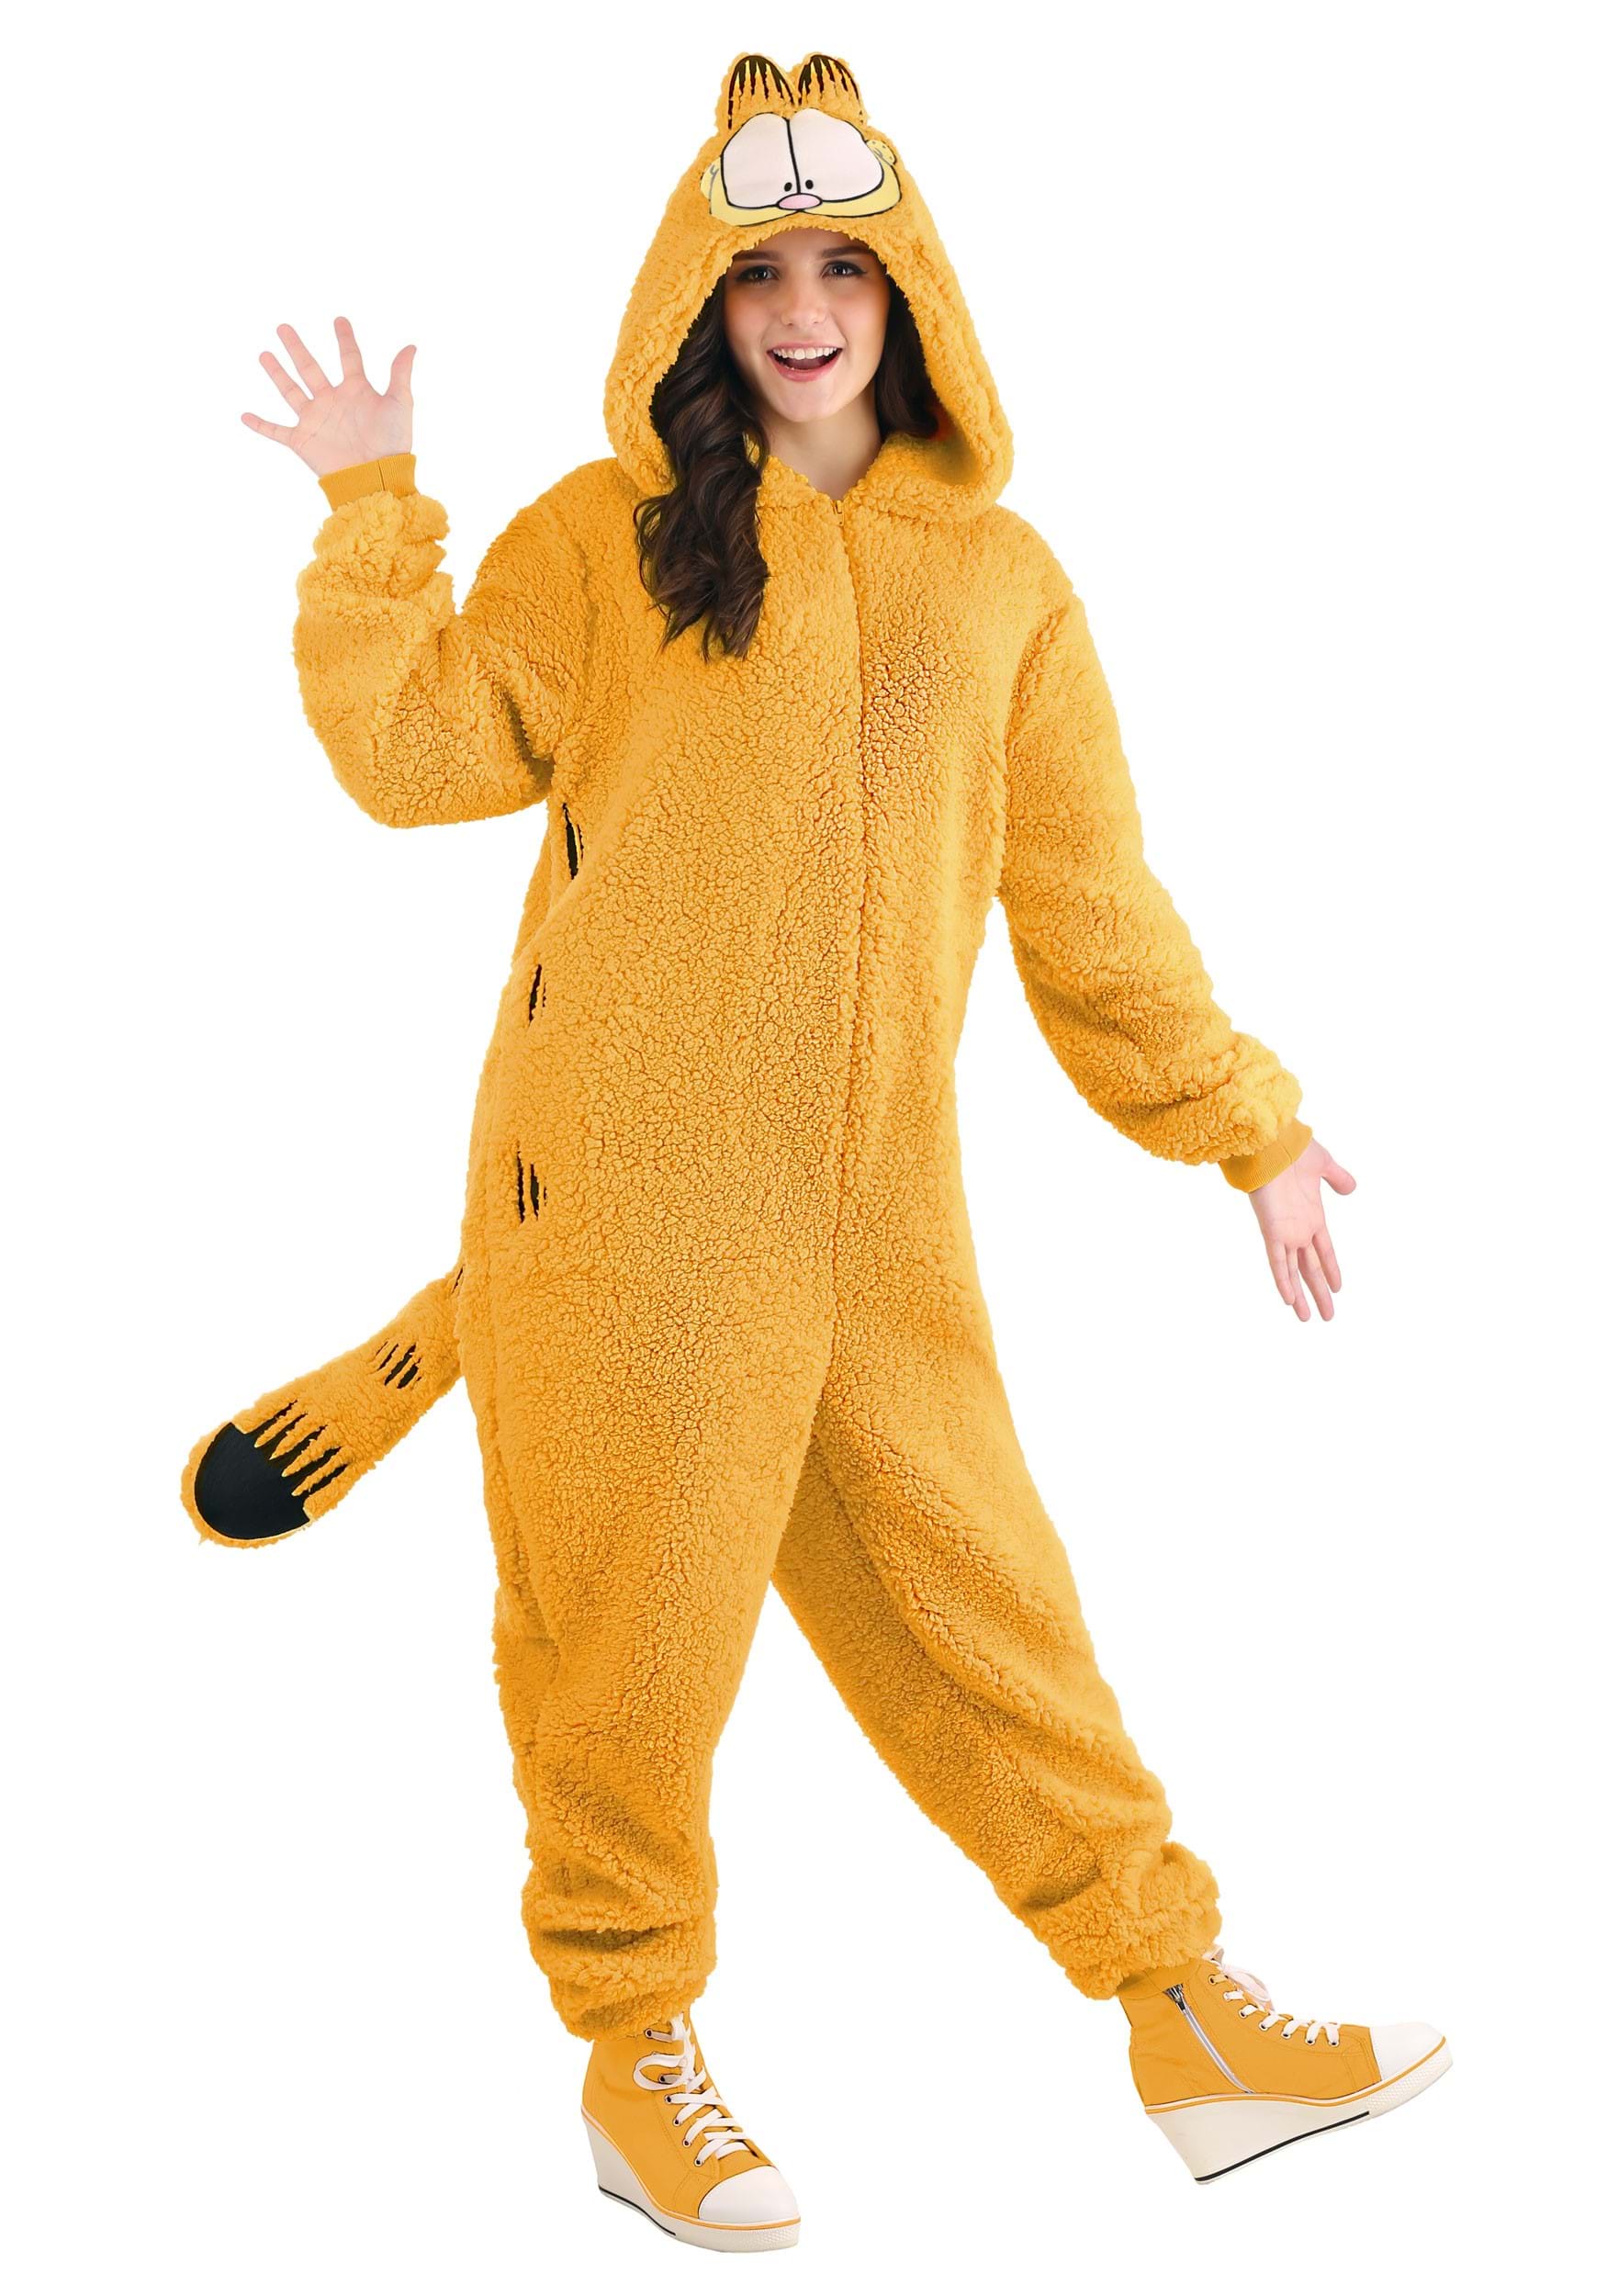 Abroad Hysterical Adaptation Garfield One-piece Adult Costume